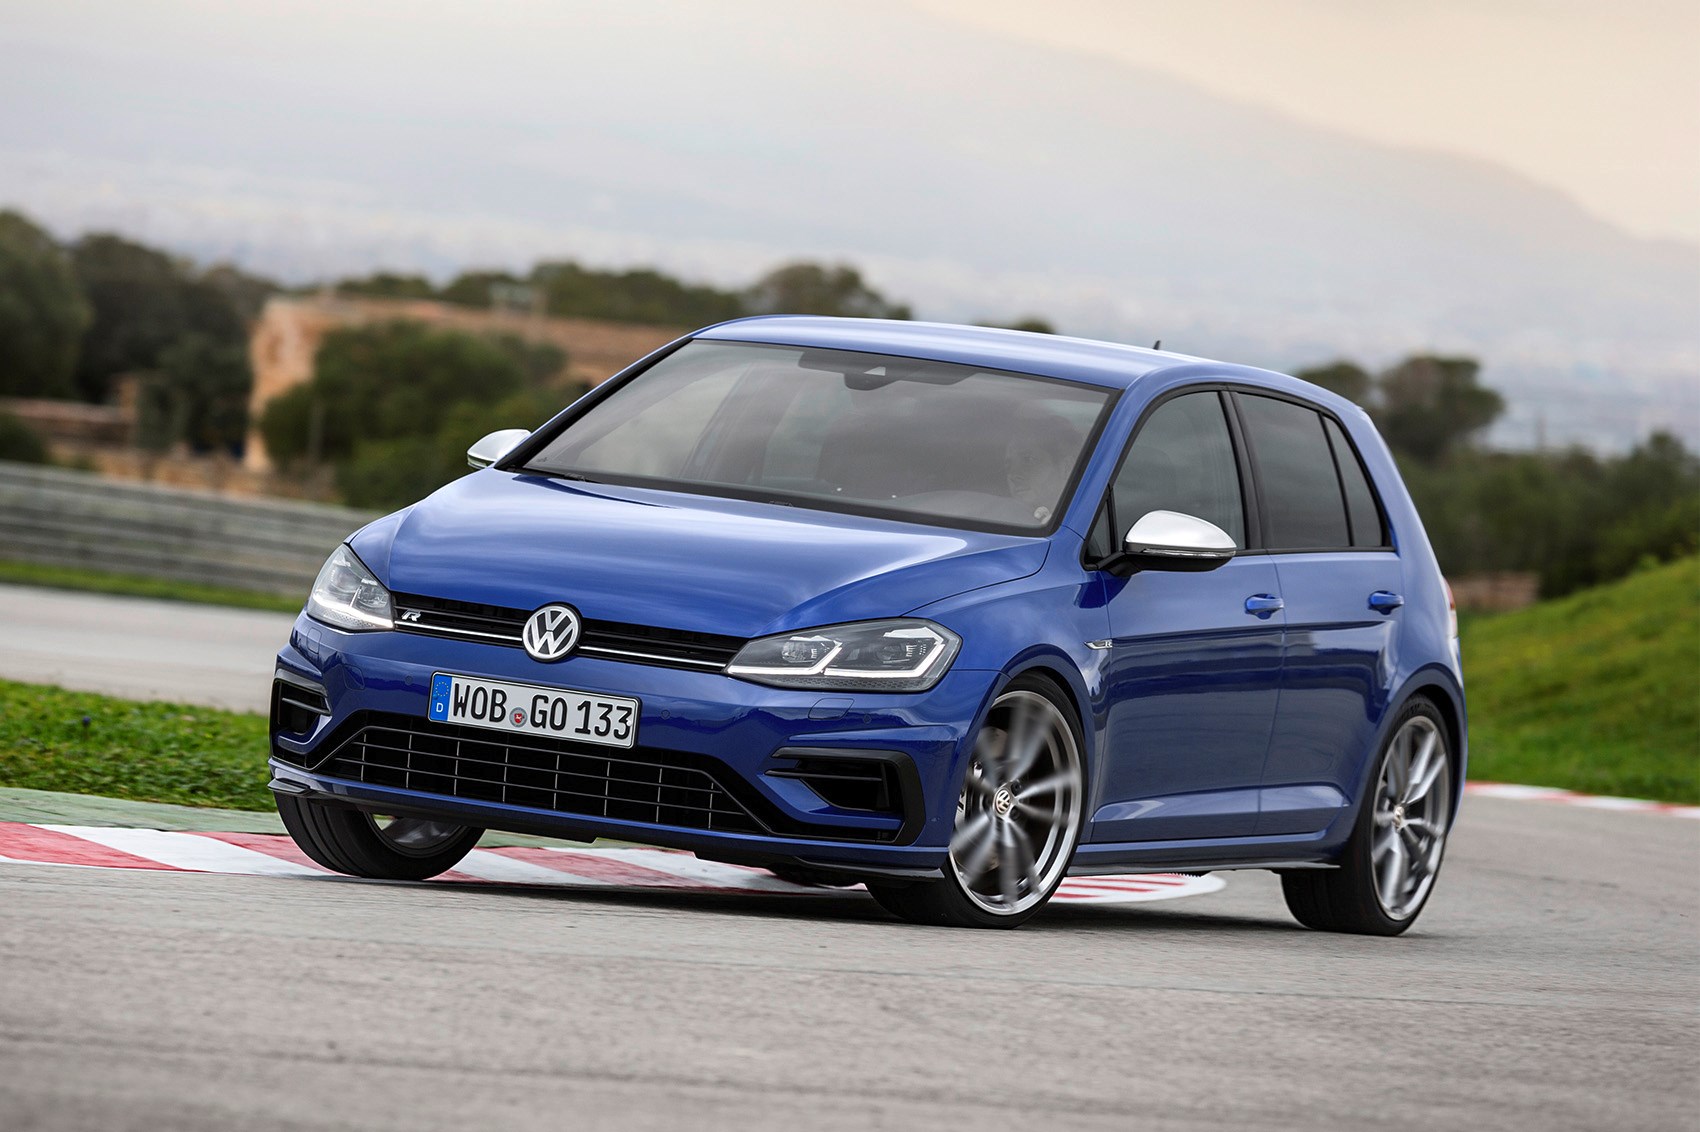 Should I buy a VW Golf or wait for the GTI Performance